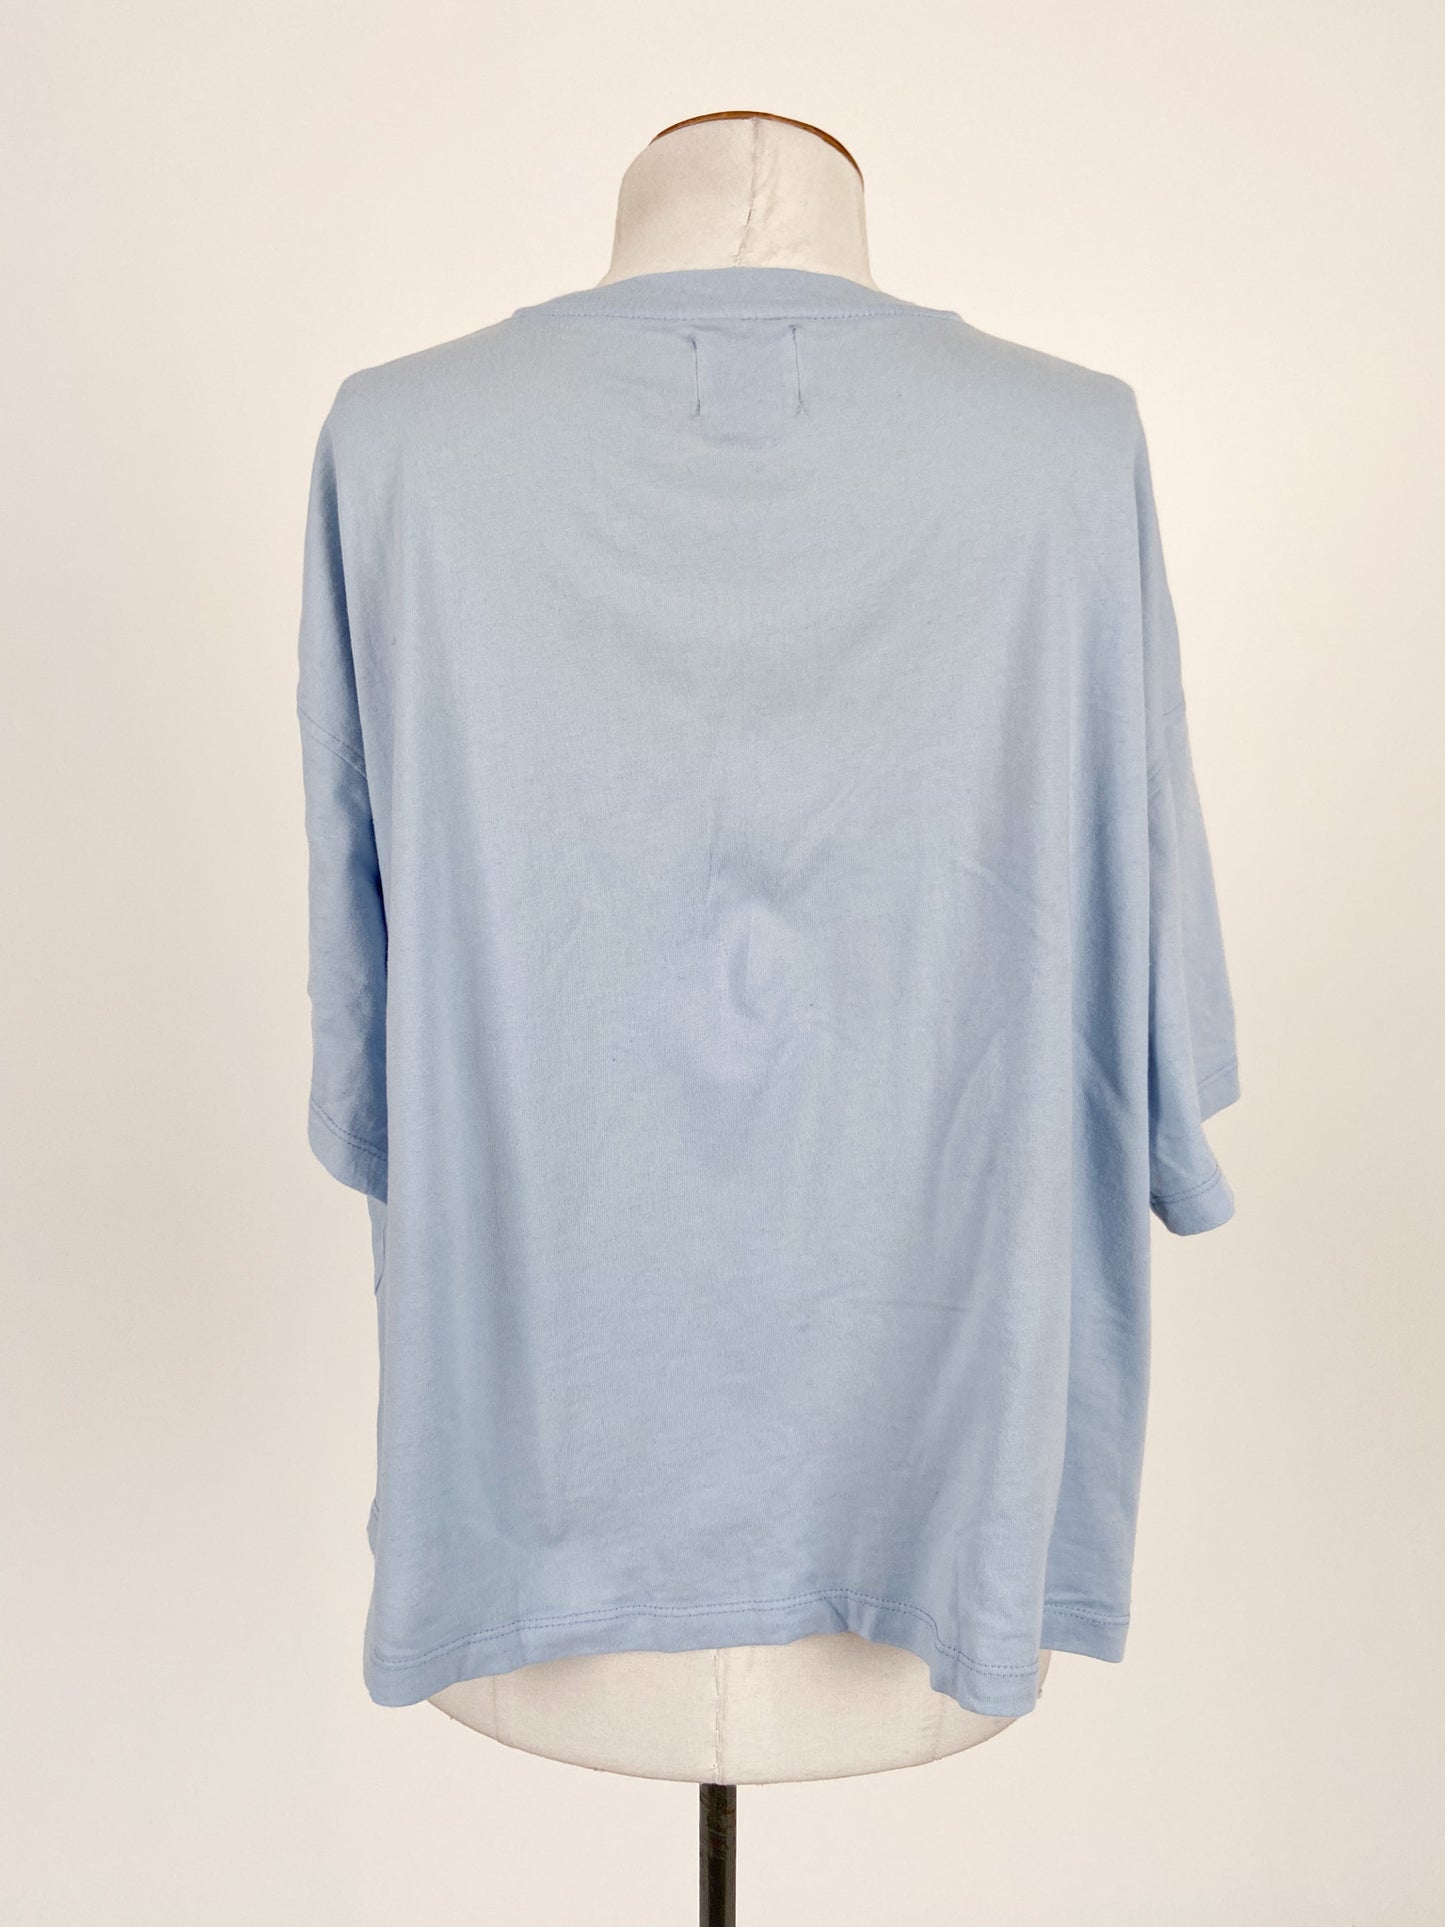 Taylor Sport | Blue Casual Top | Size M